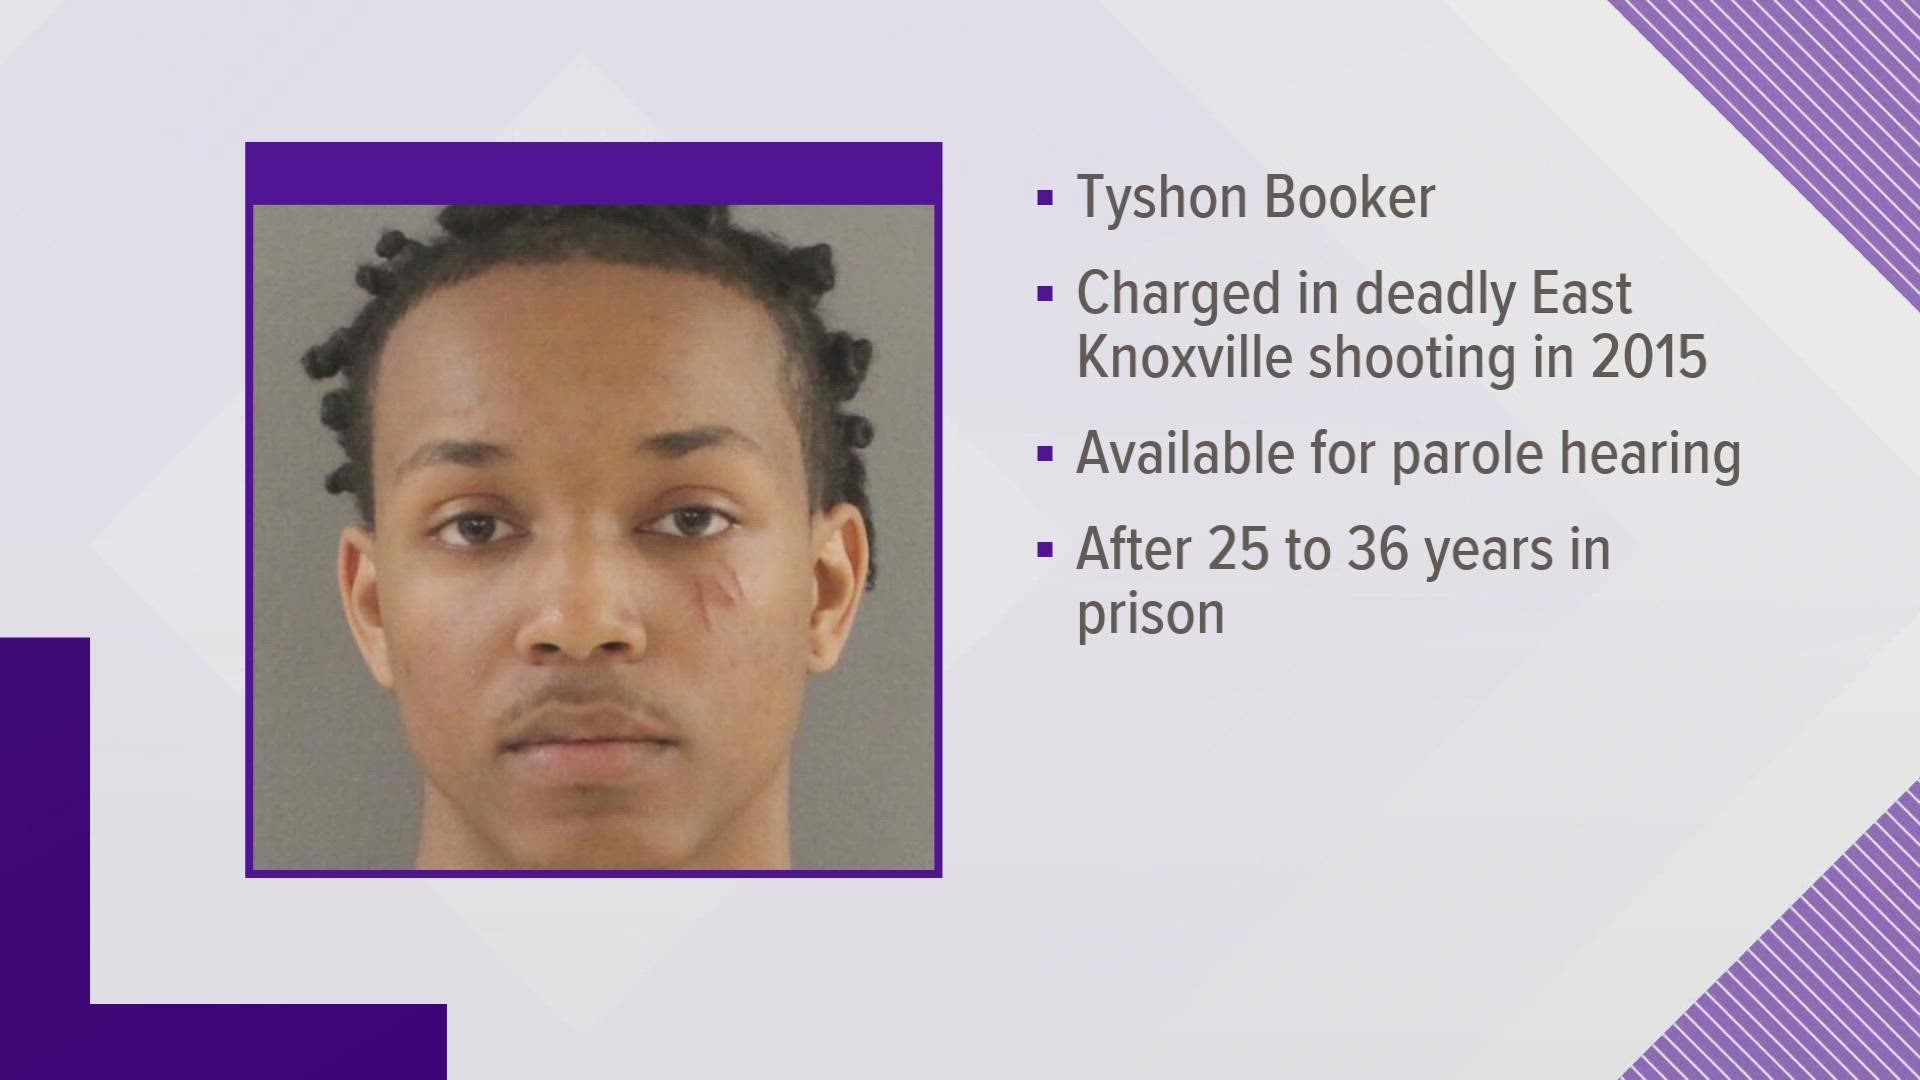 The state's high court said a mandatory life sentence for a Knoxville man convicted of murder as a 16-year-old is unconstitutional.